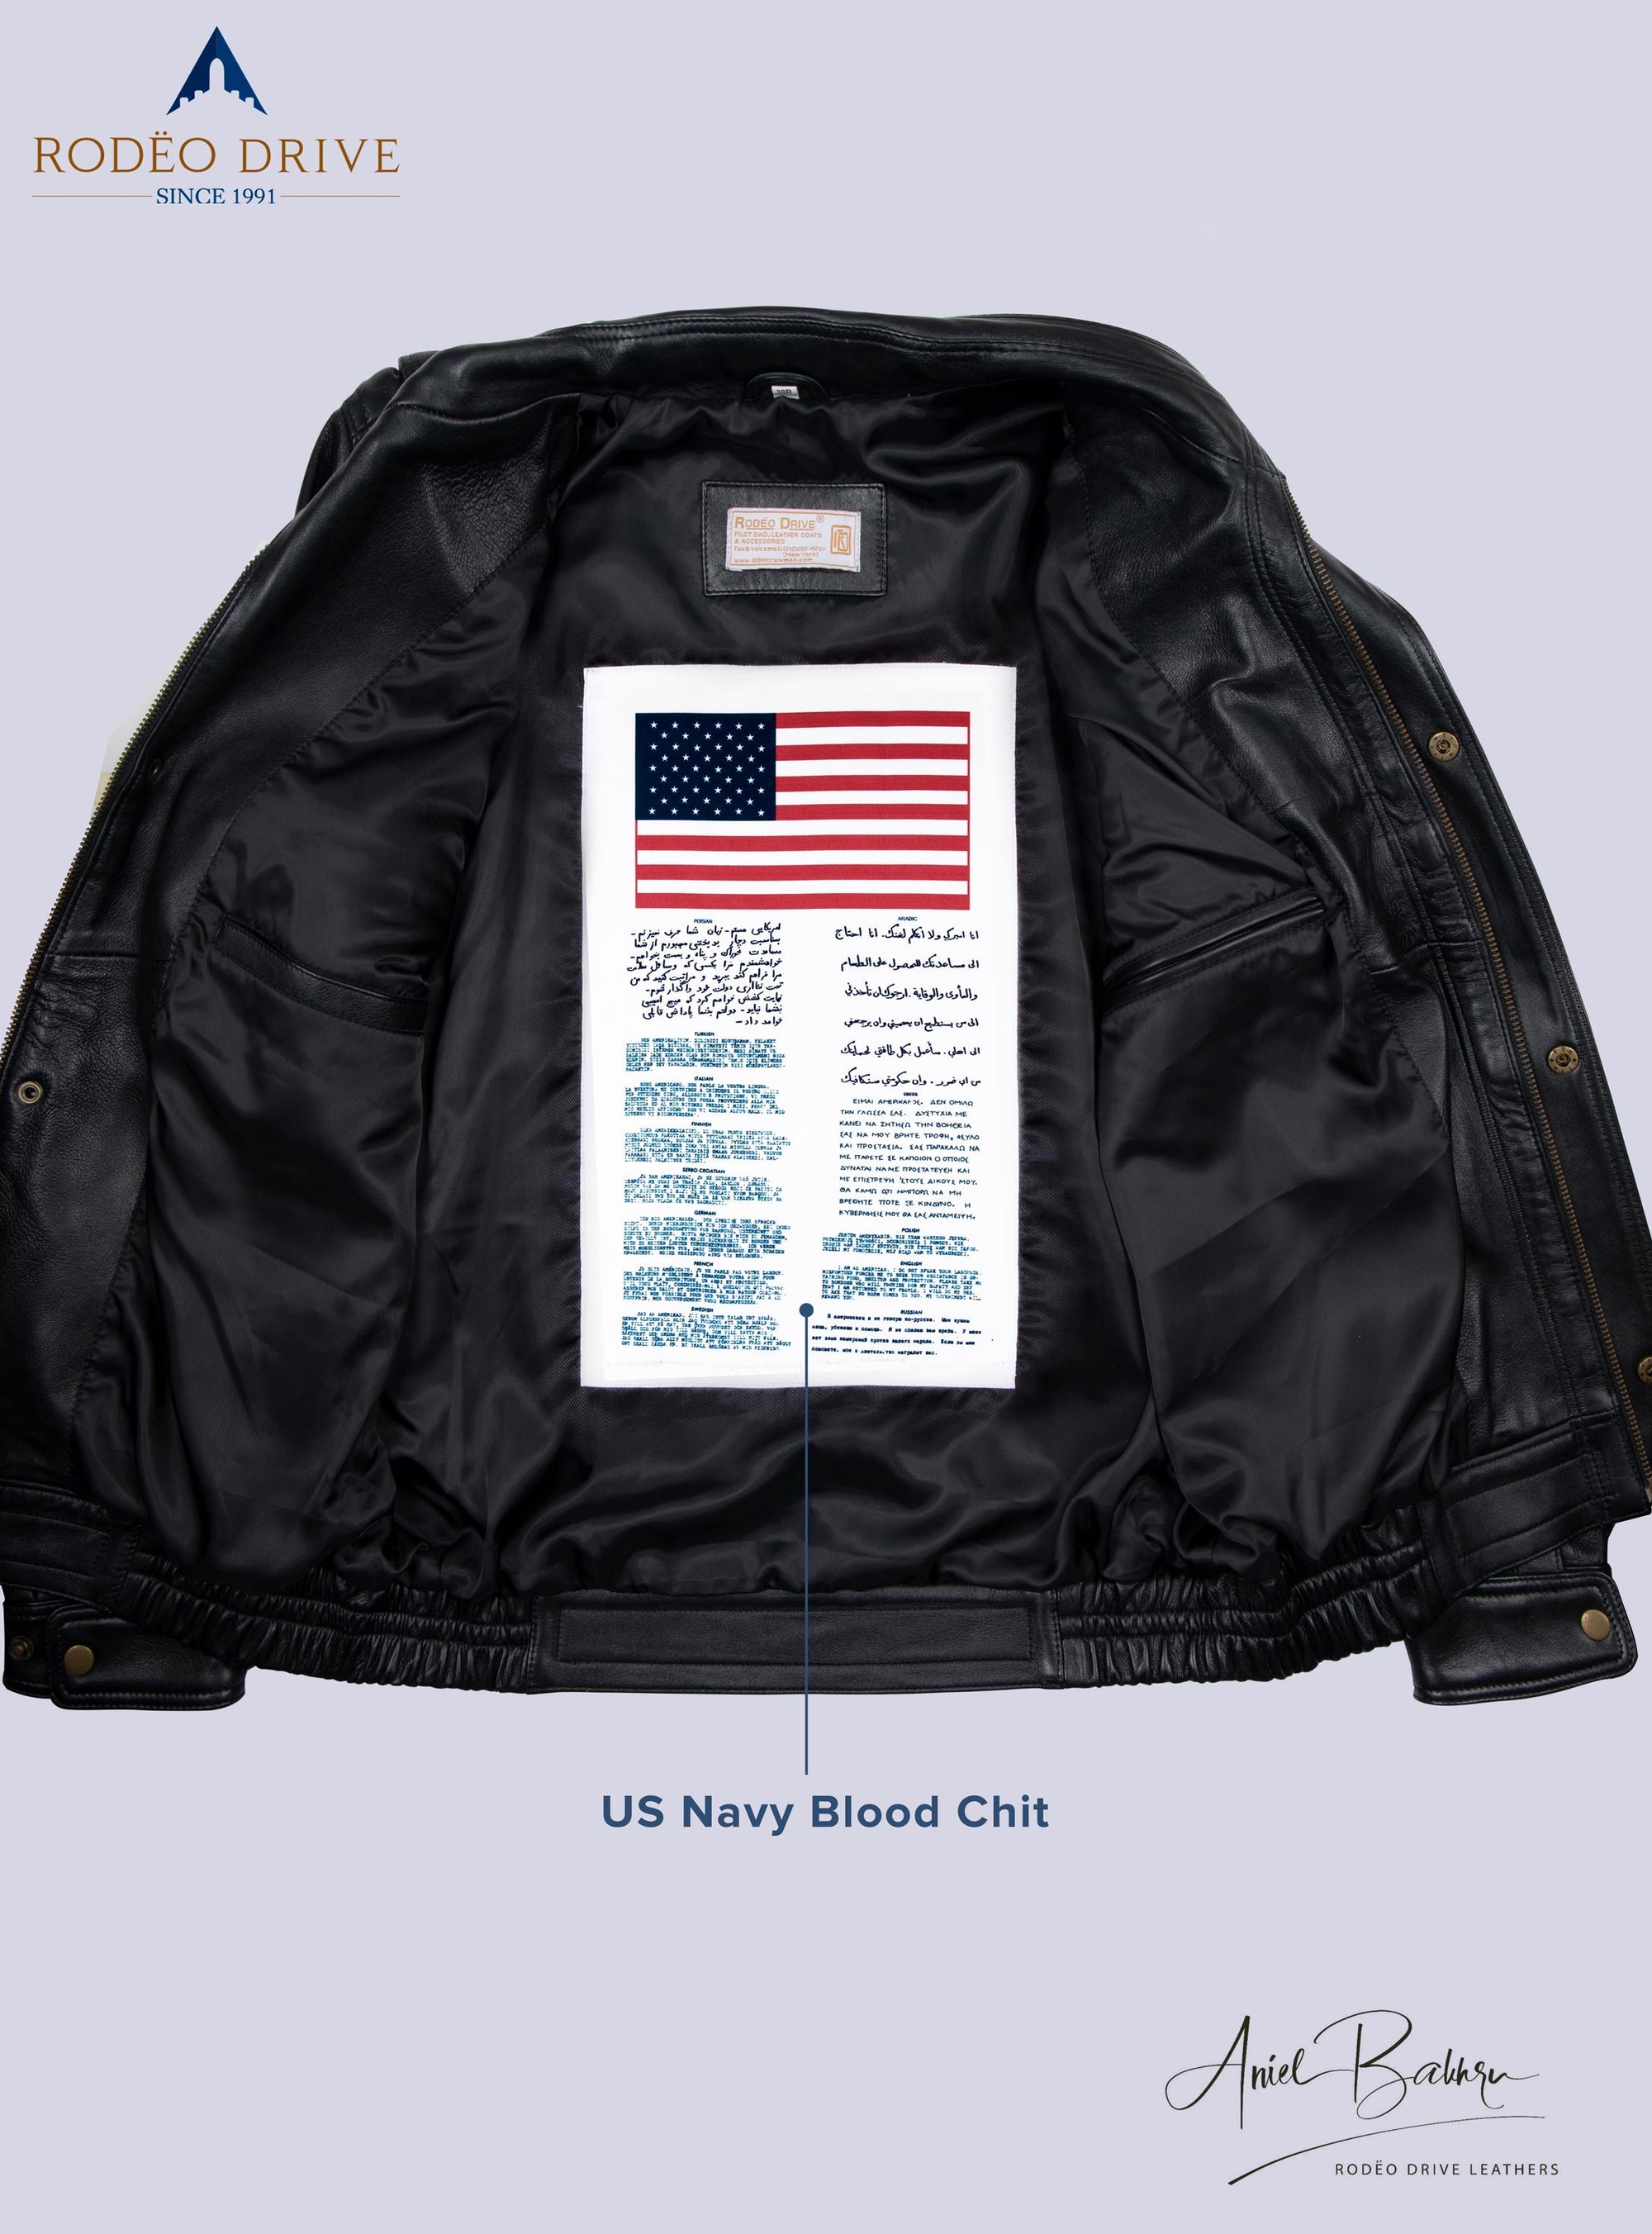 Image of inside part of Bomber short jacket,  A USA  Navy Blood chit is sewed inside.